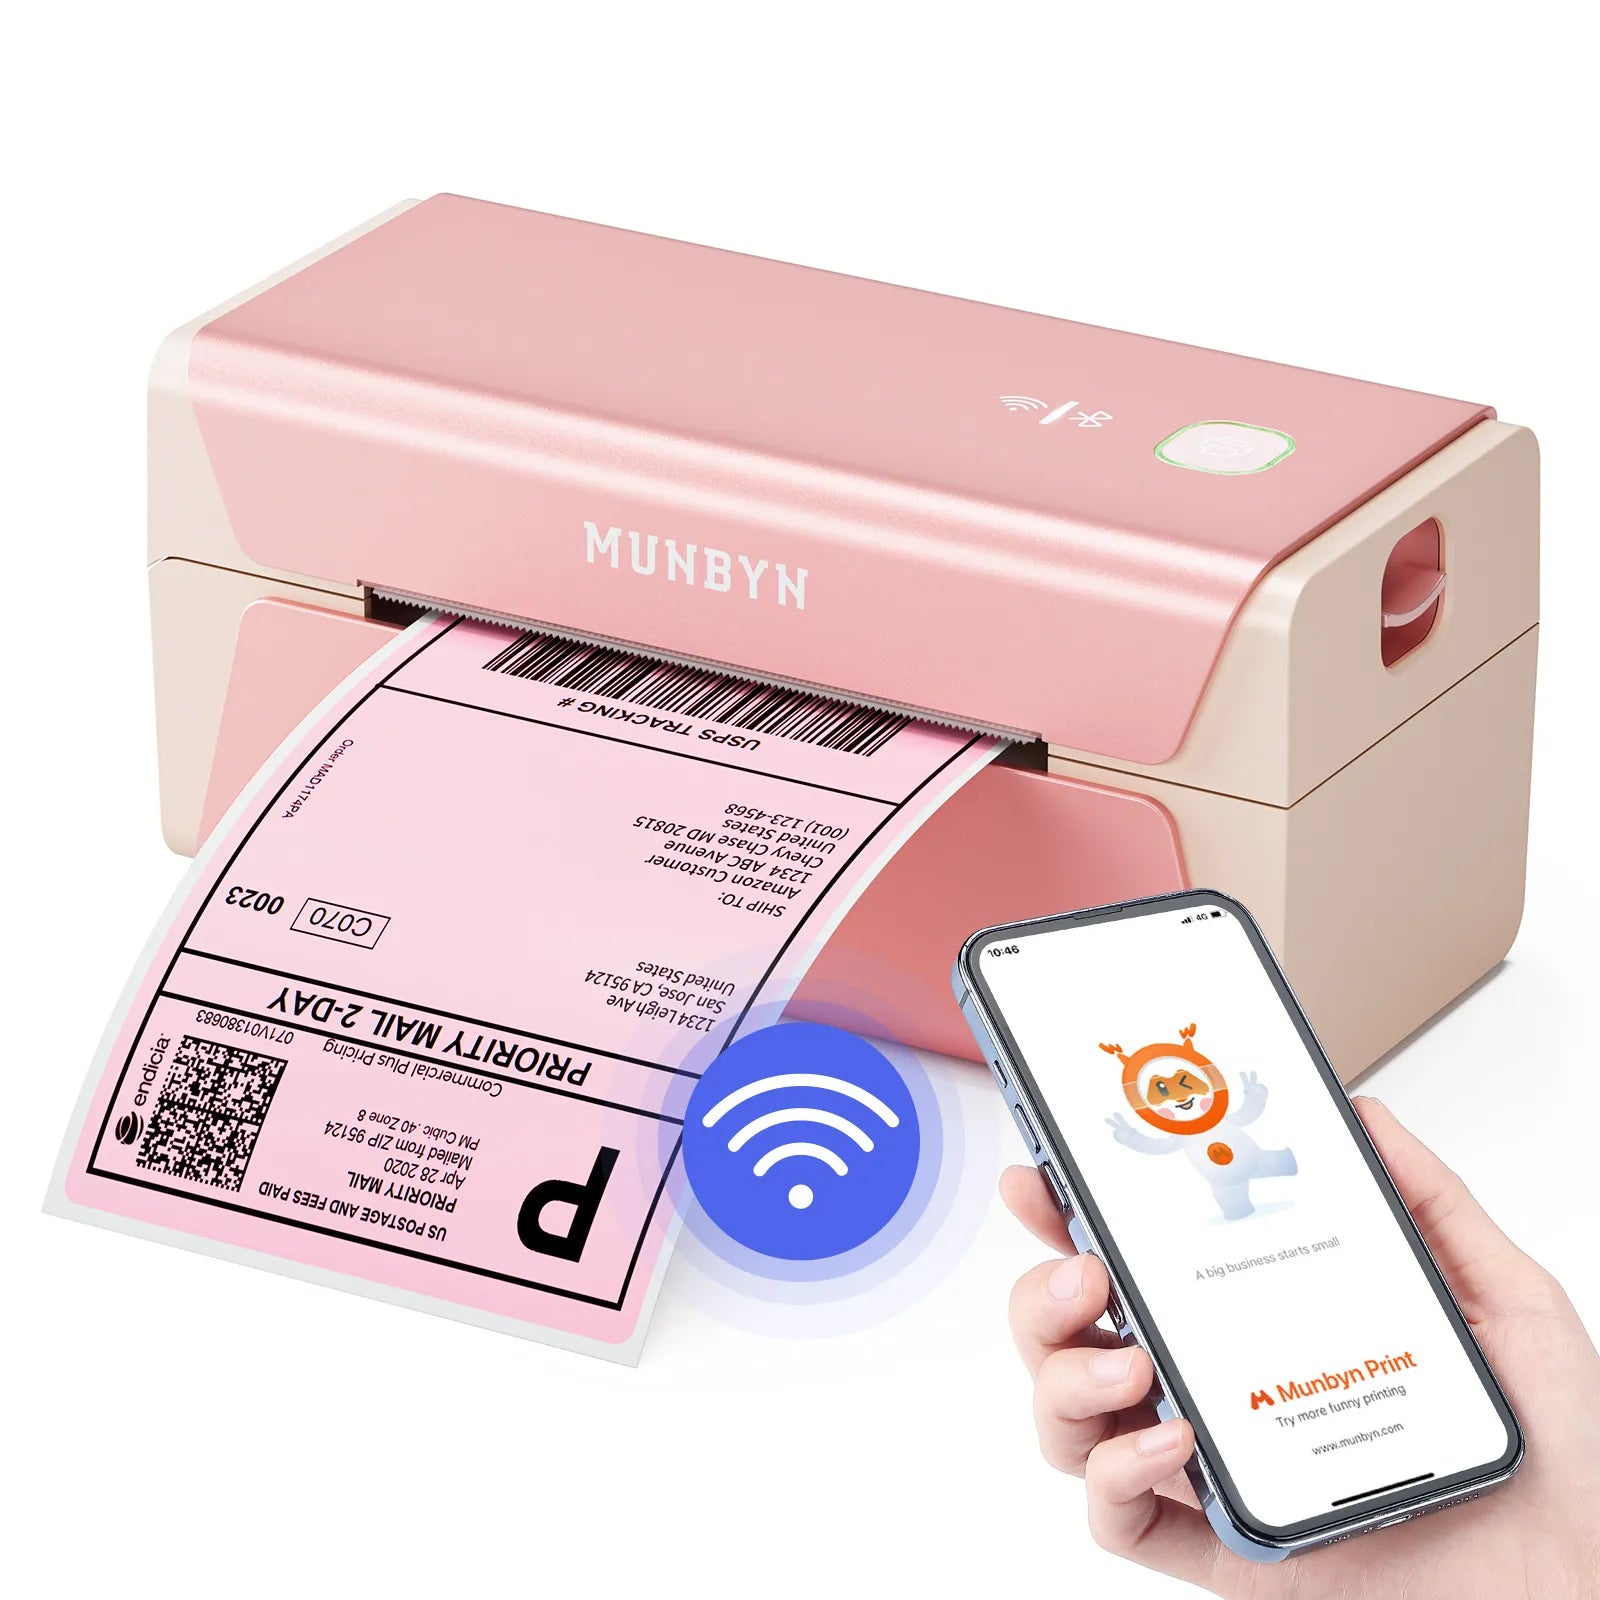 MUNBYN Voice Controlled Wireless Thermal Label Printer P44S connects to mobile phones using WiFi.